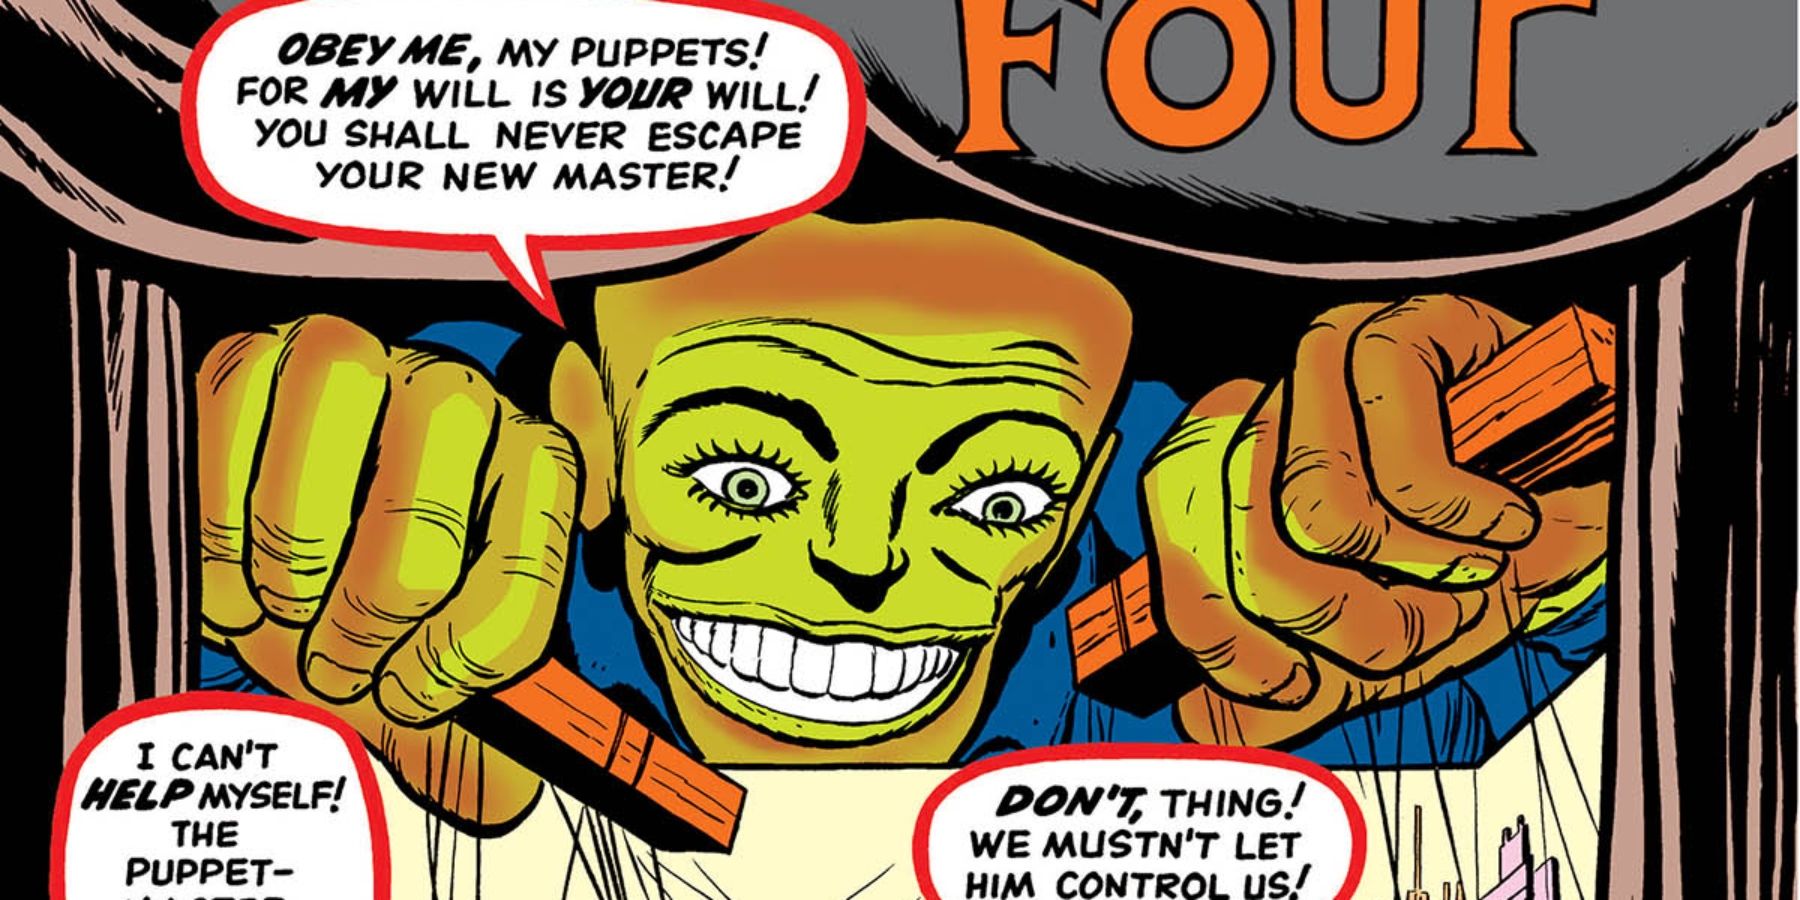 The Puppet Master from Fantastic Four comics